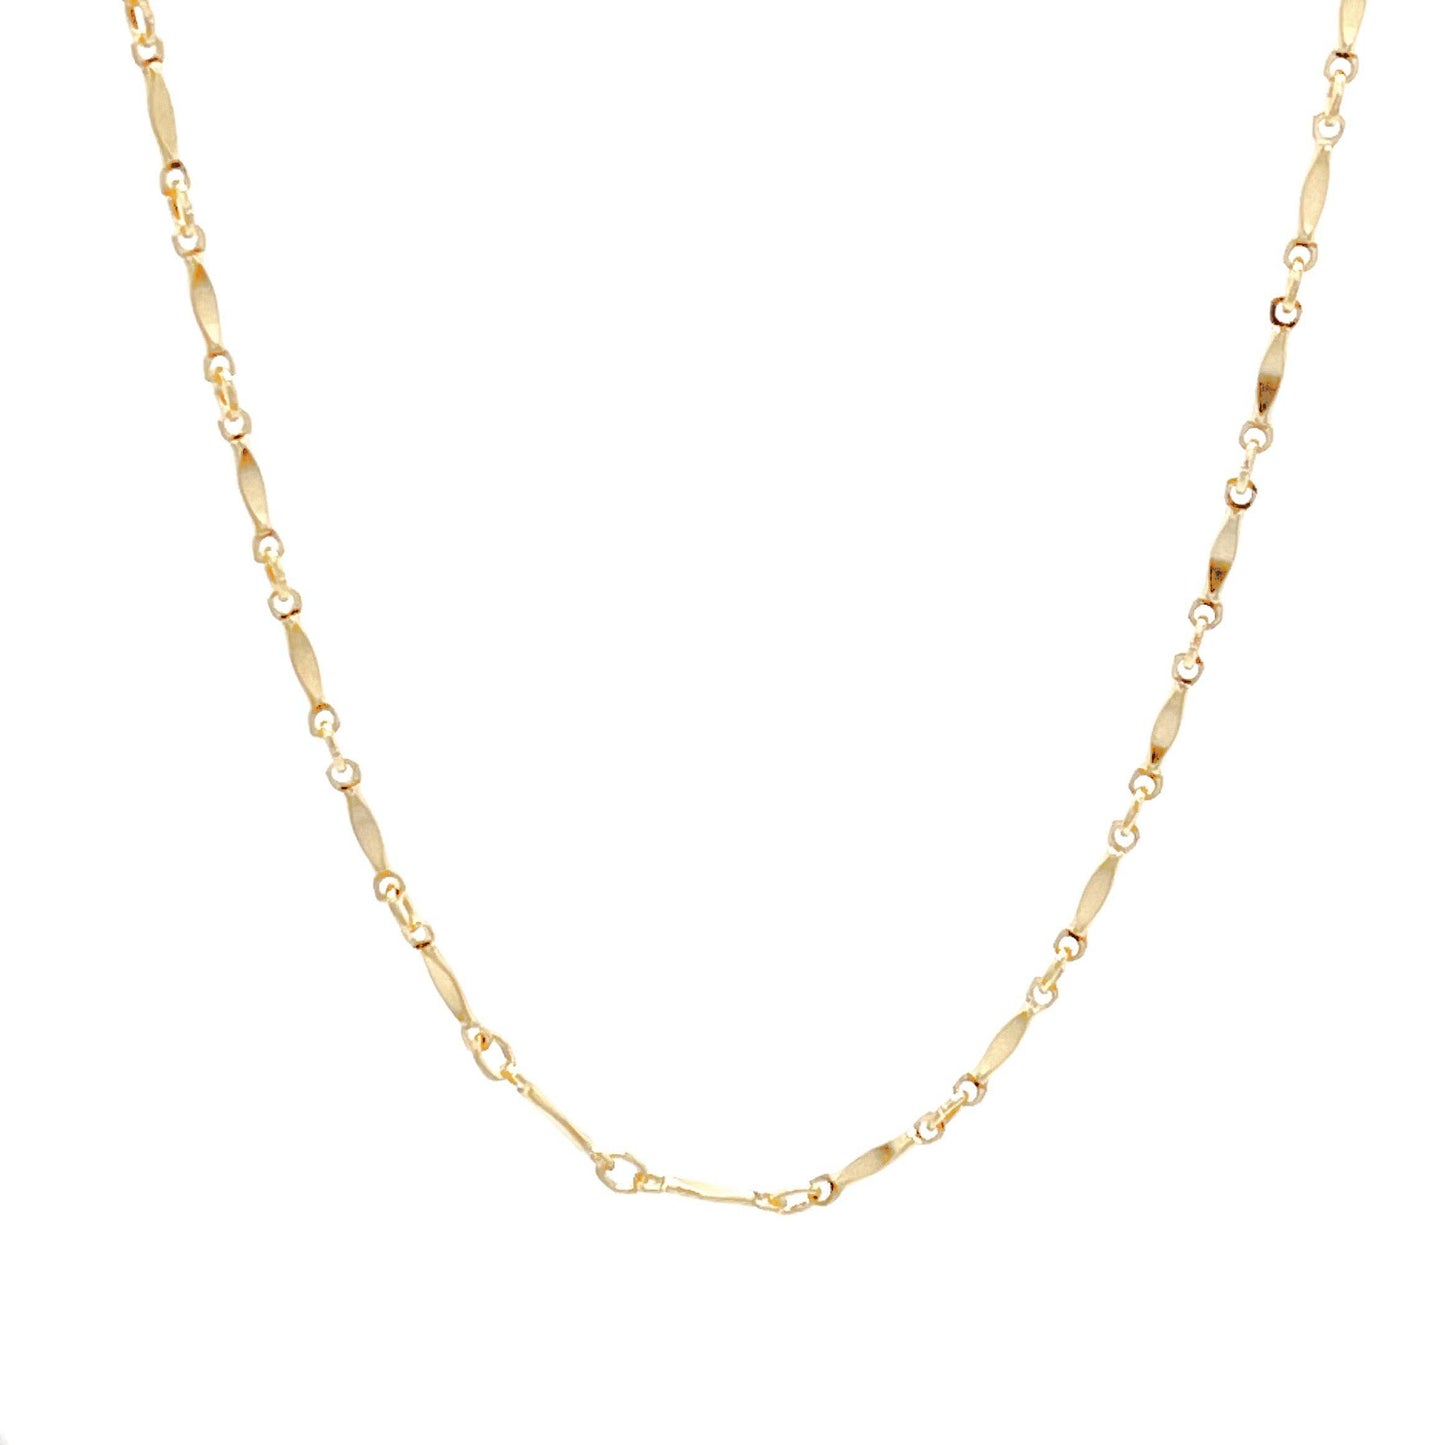 Dainty Bar Chain Layering Necklace w/ 2" Built-In Extender